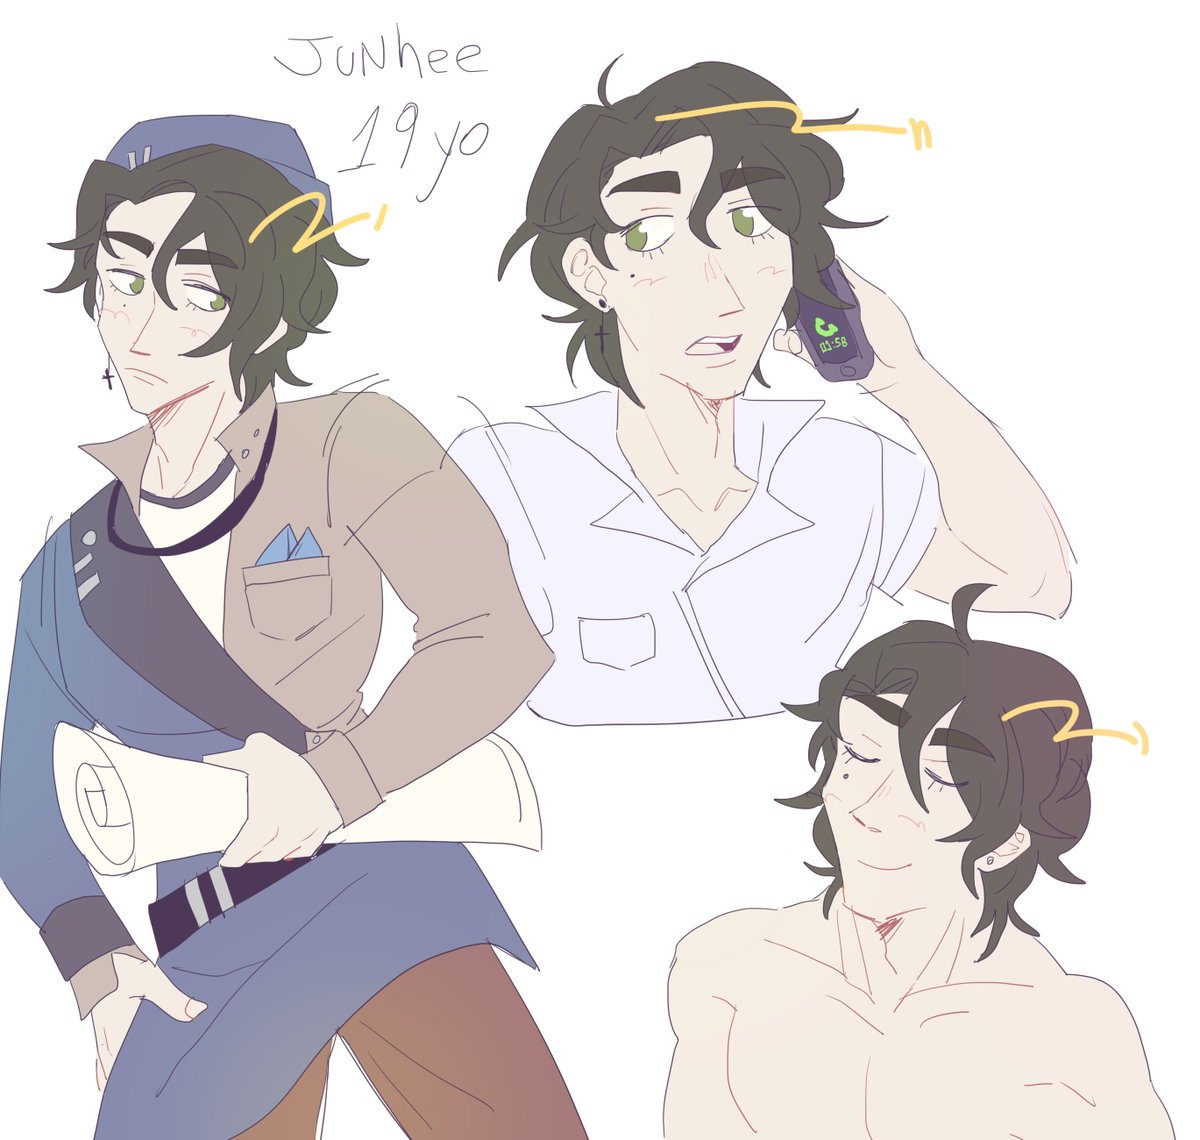 OC doodles, their names are Archie and Junhee.

Because of their conflicting personalities, their relationship is often surrounded by arguments... But they can have wholesome moments🥰 